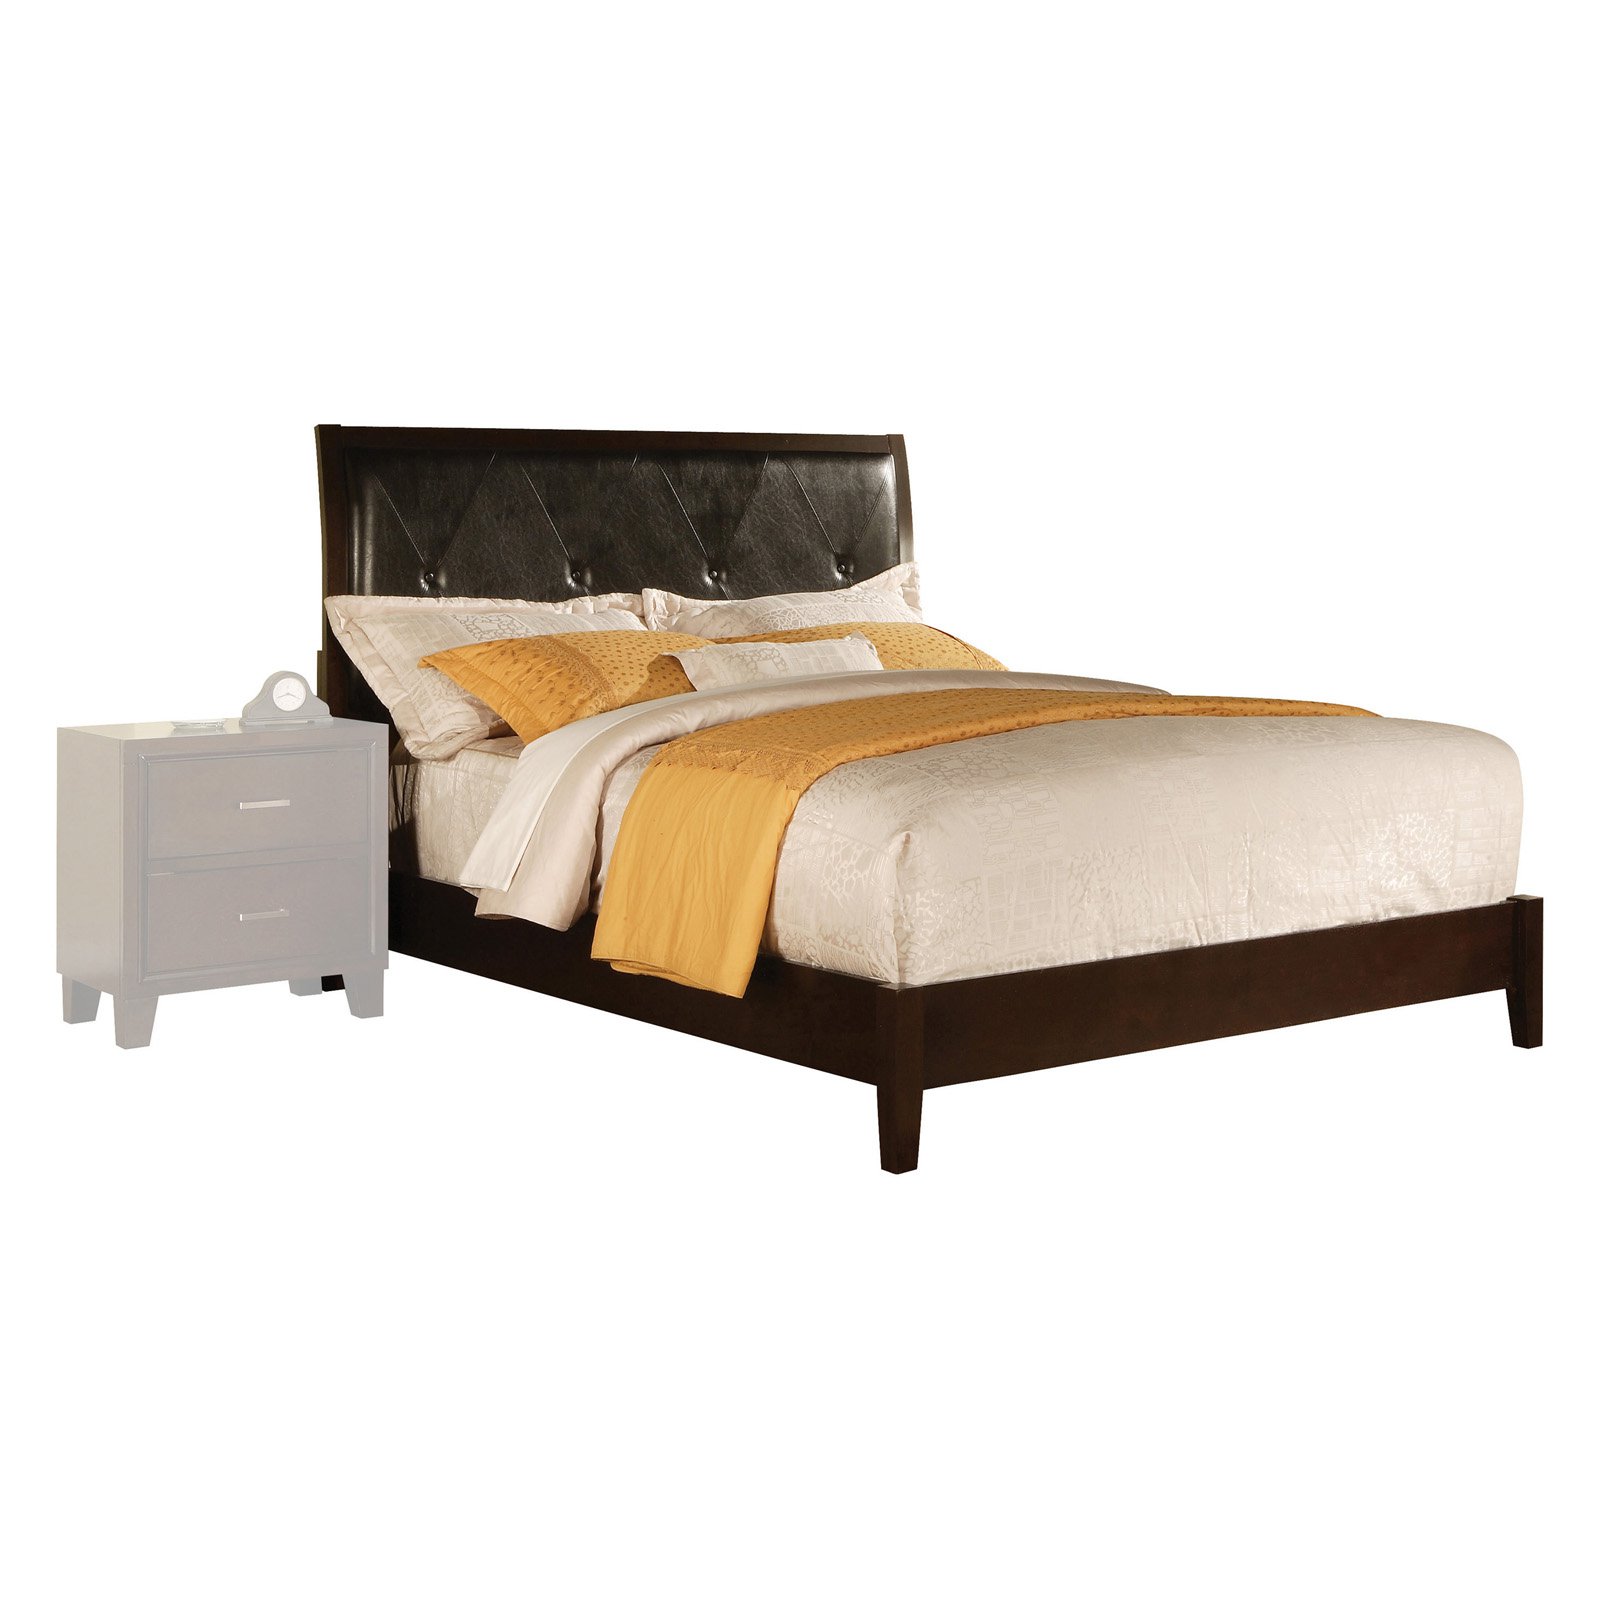 ACME Tyler Twin Bed in Black PU & Cappuccino, Multiple Sizes - image 1 of 2